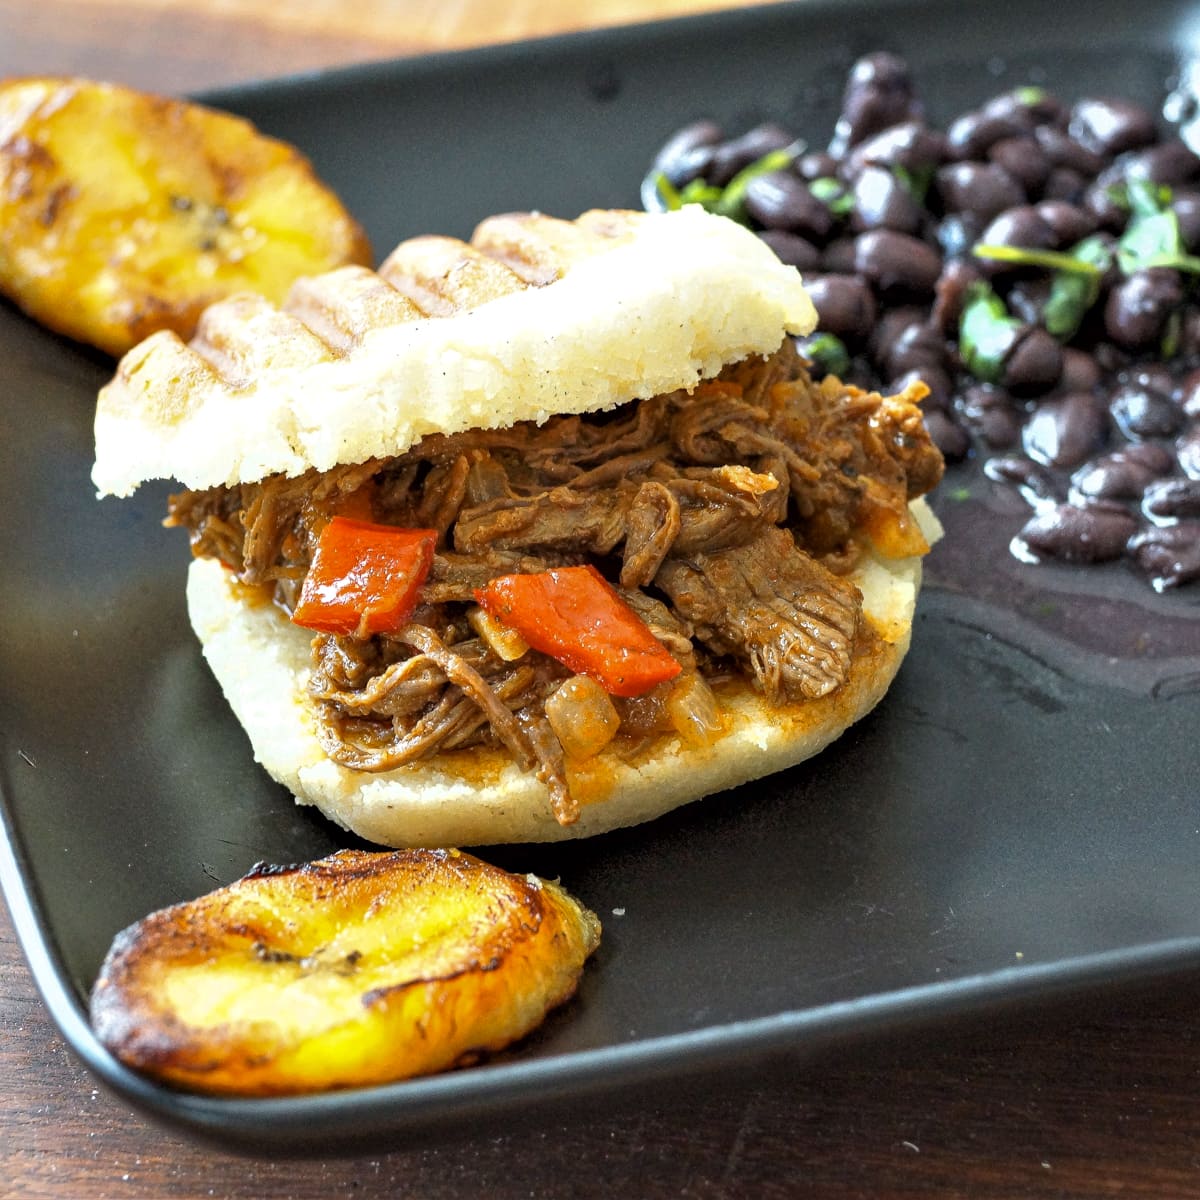 Shredded carne mechada served on an arepa with black beans and plantains.